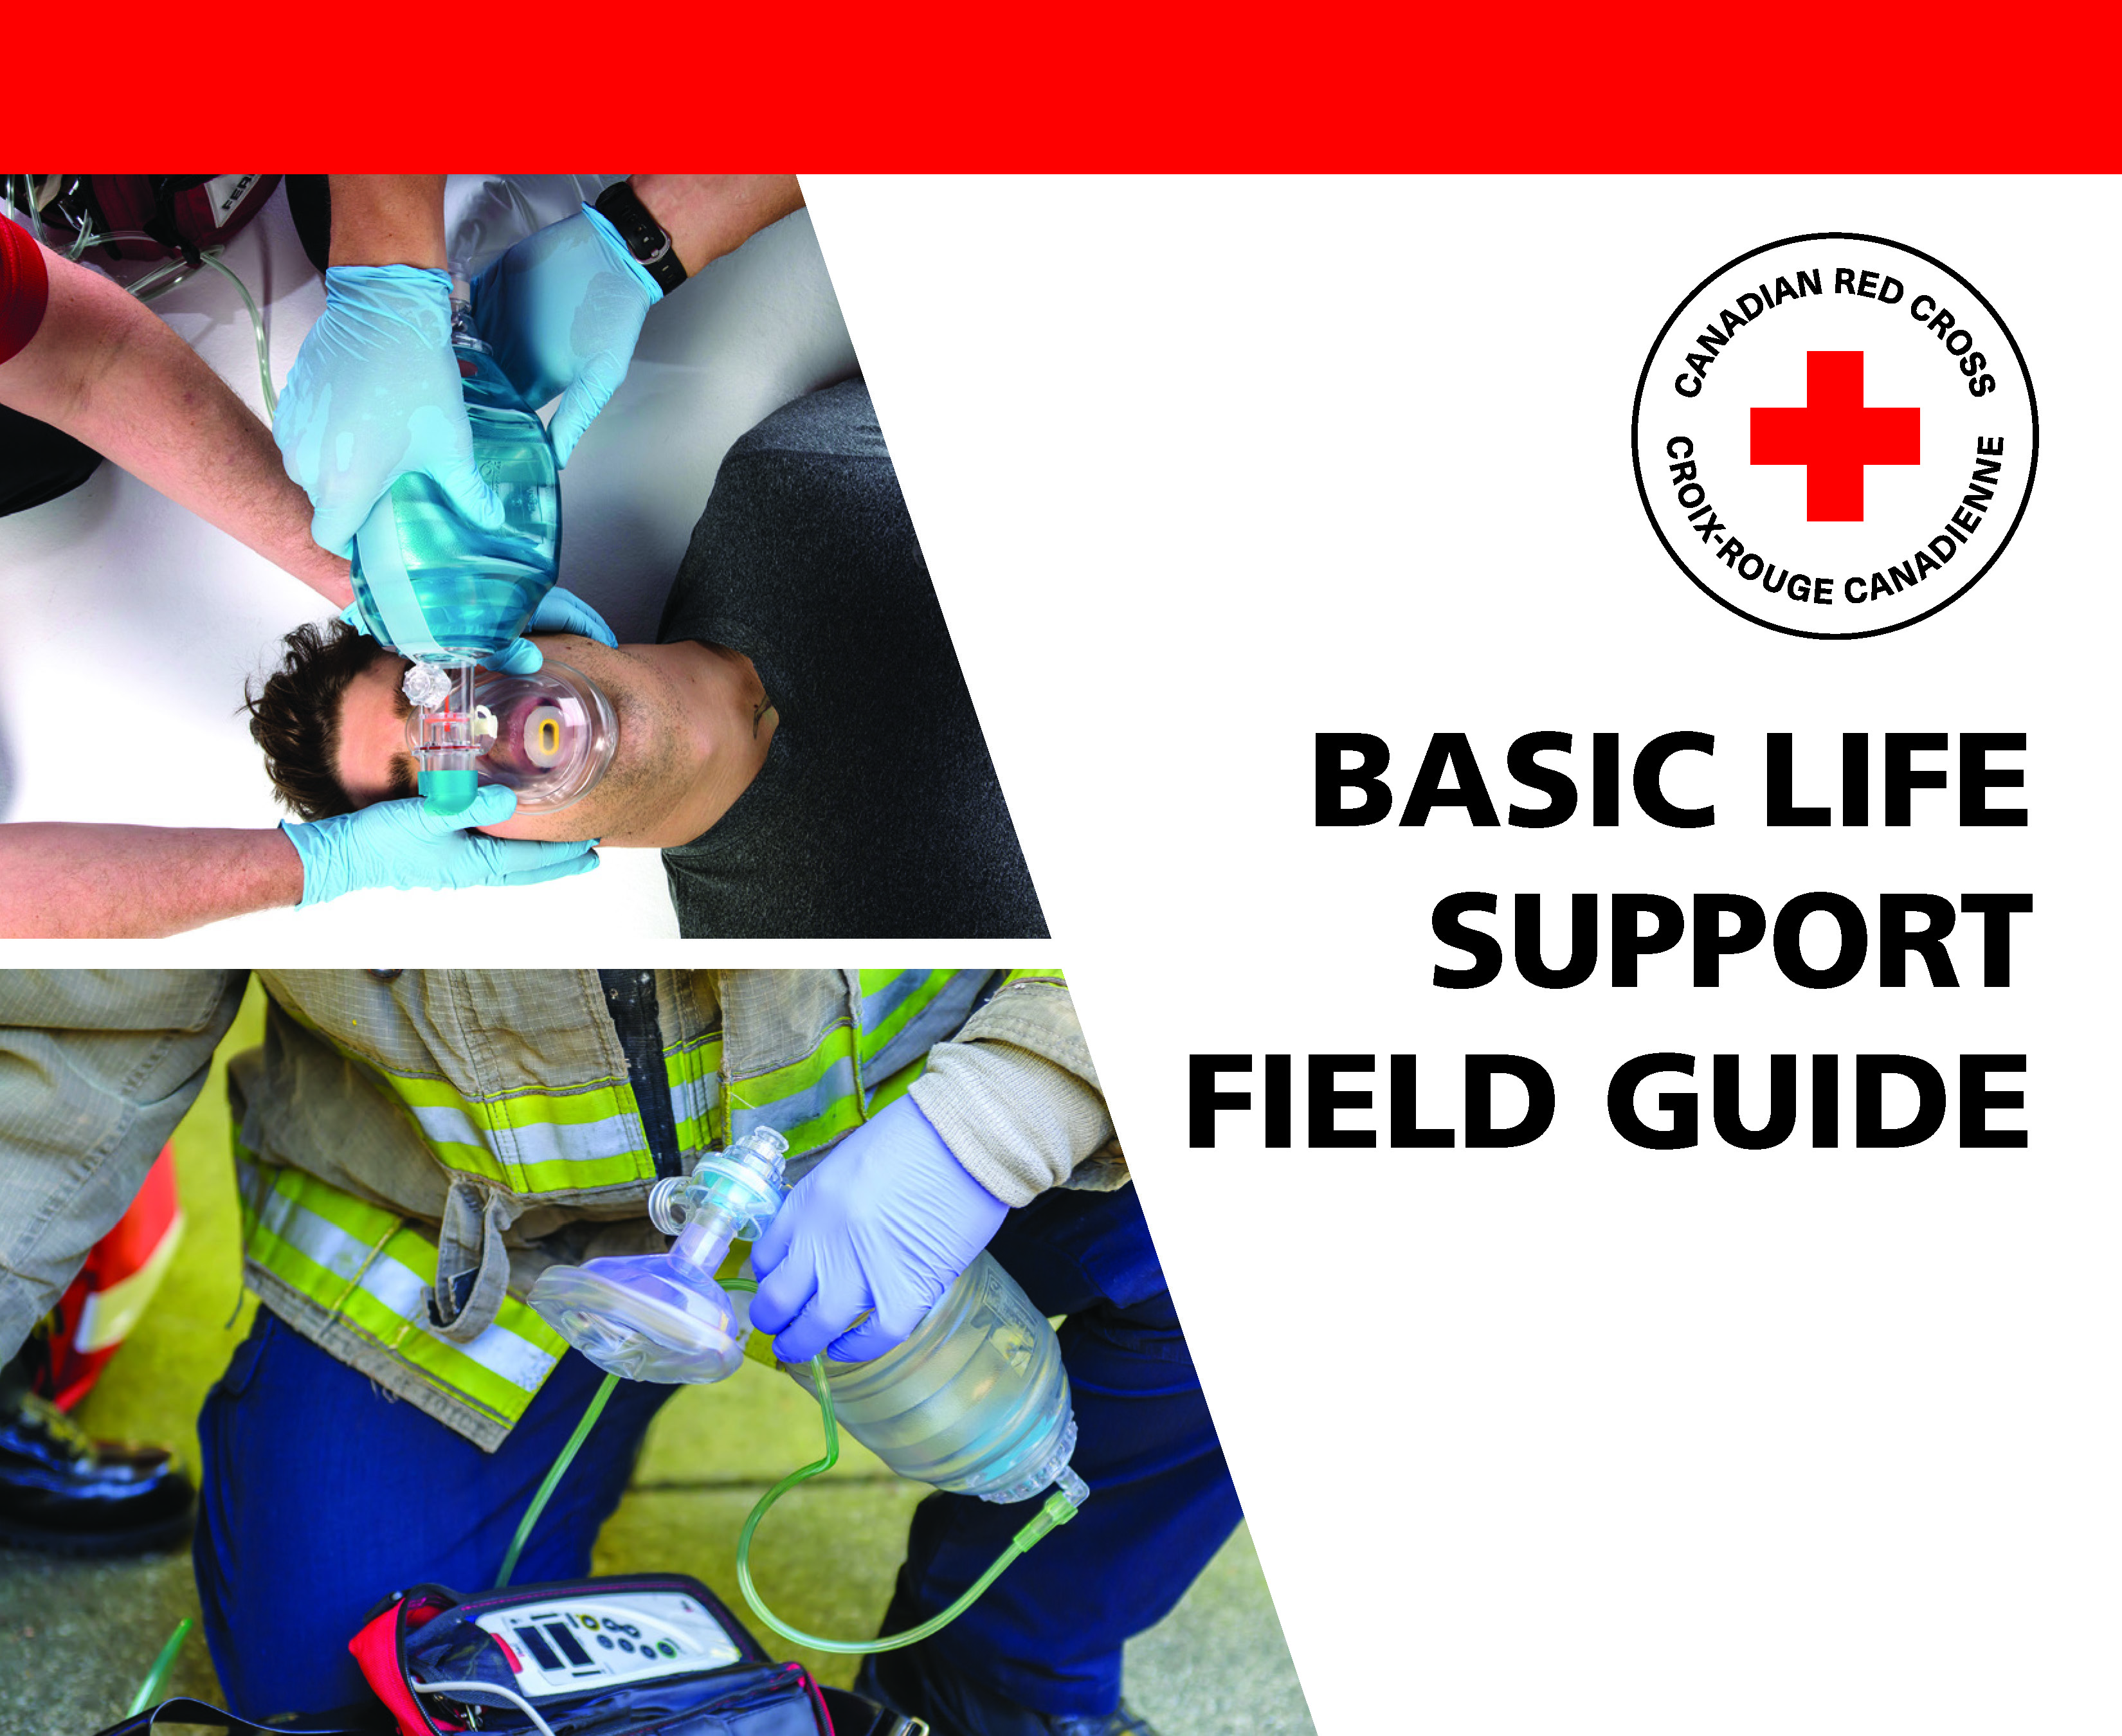 First Aid Course Materials for Airway Management in Victoria